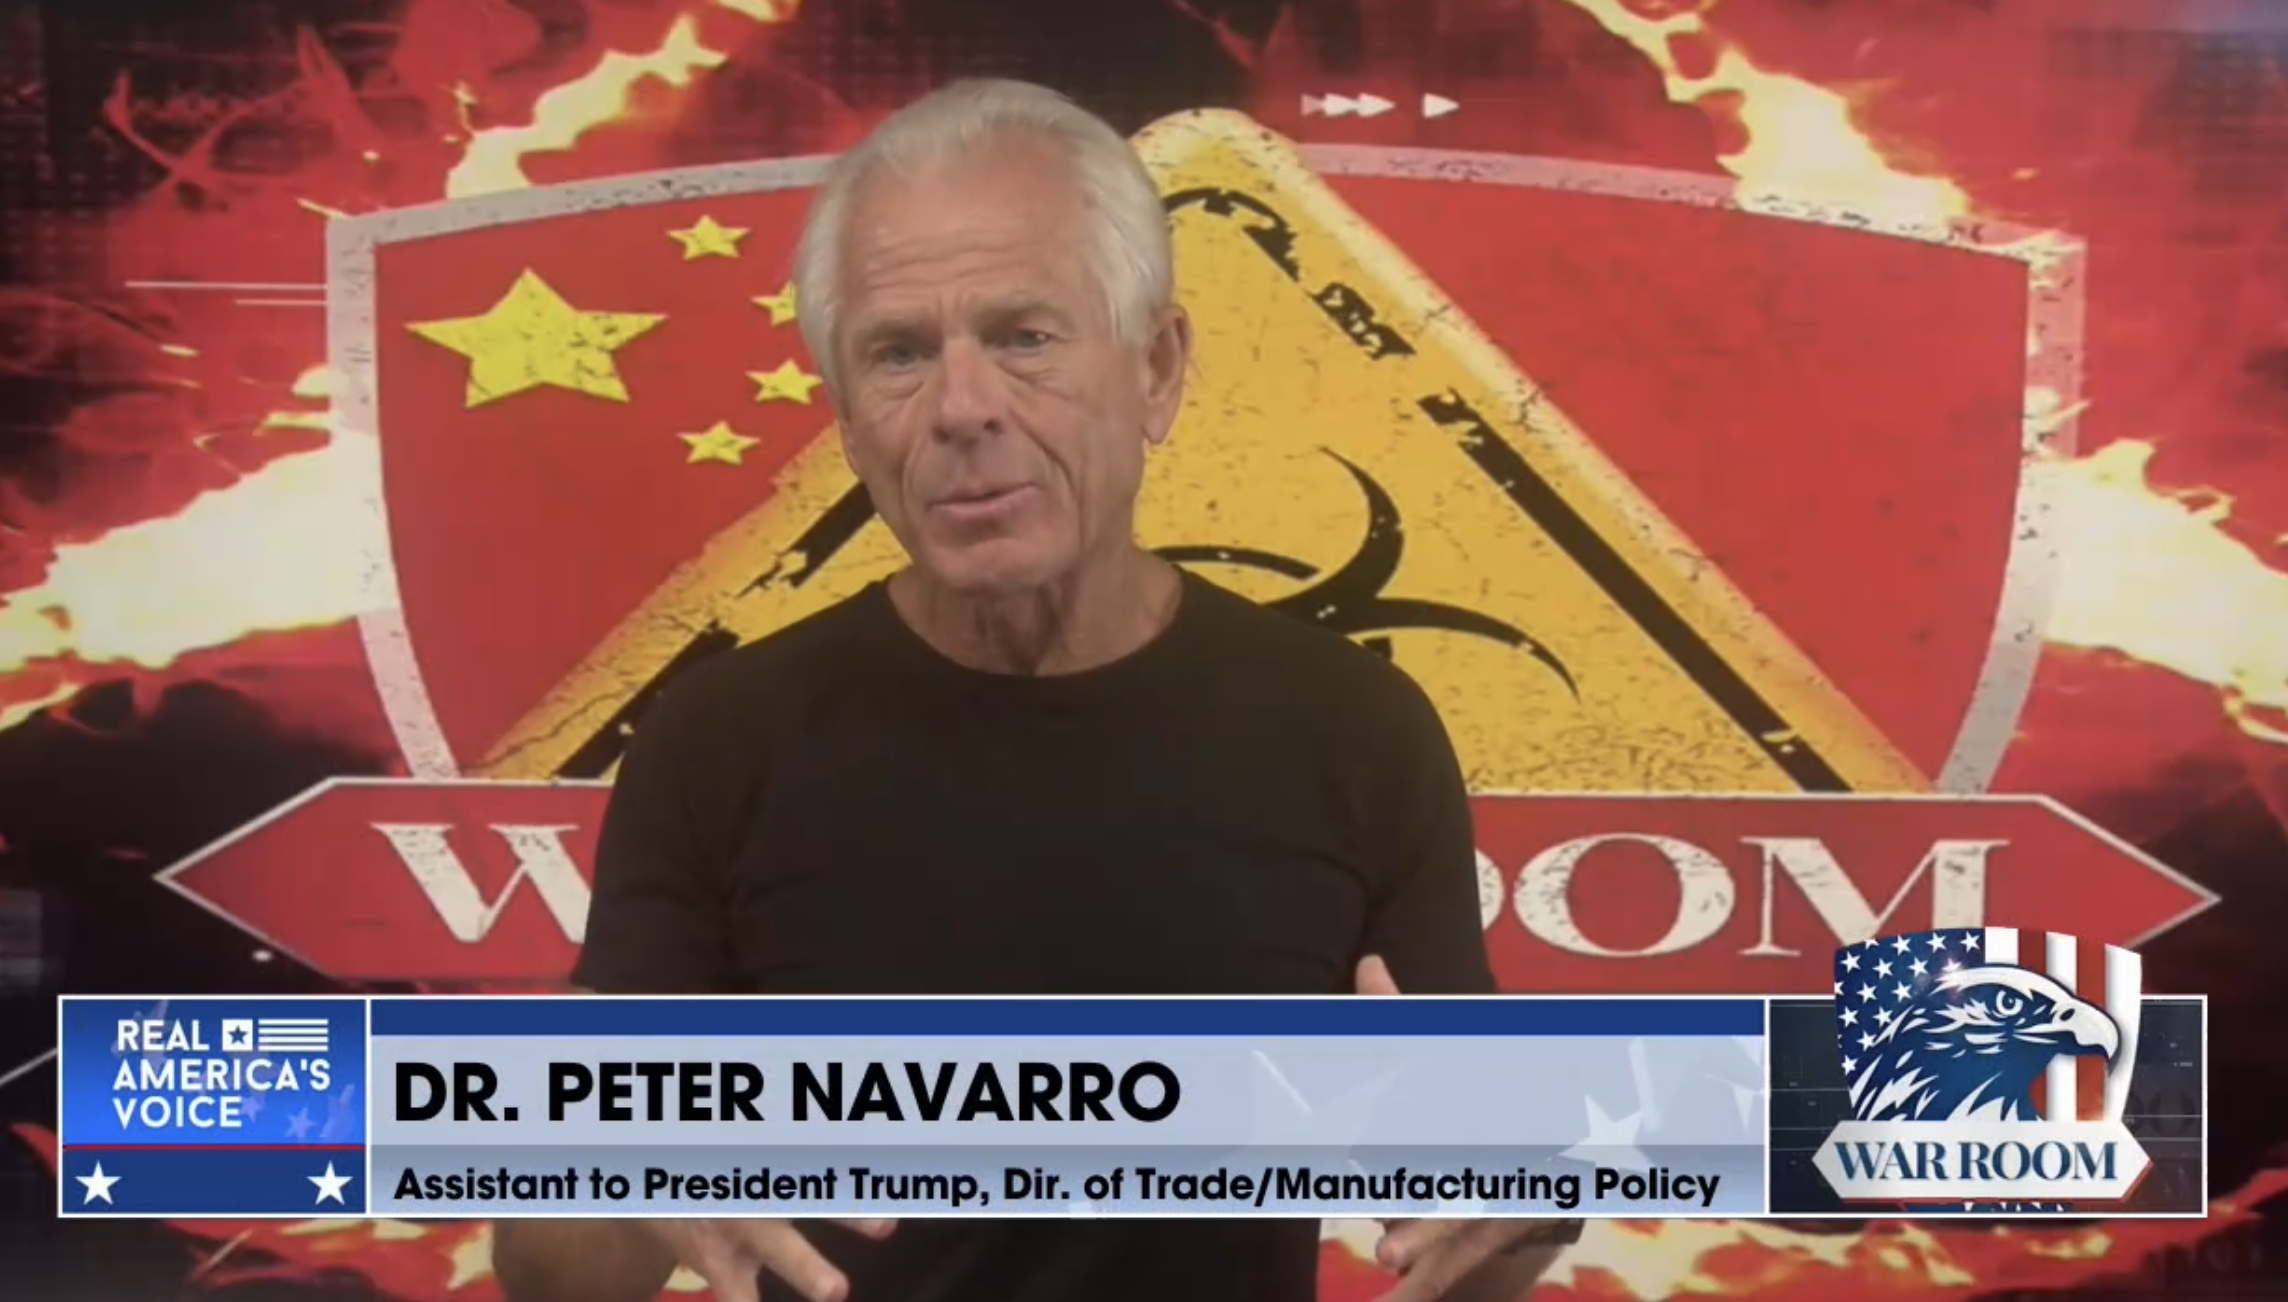 Dr. Peter Navarro: “What we need is a real Impeachment of Joe Biden”